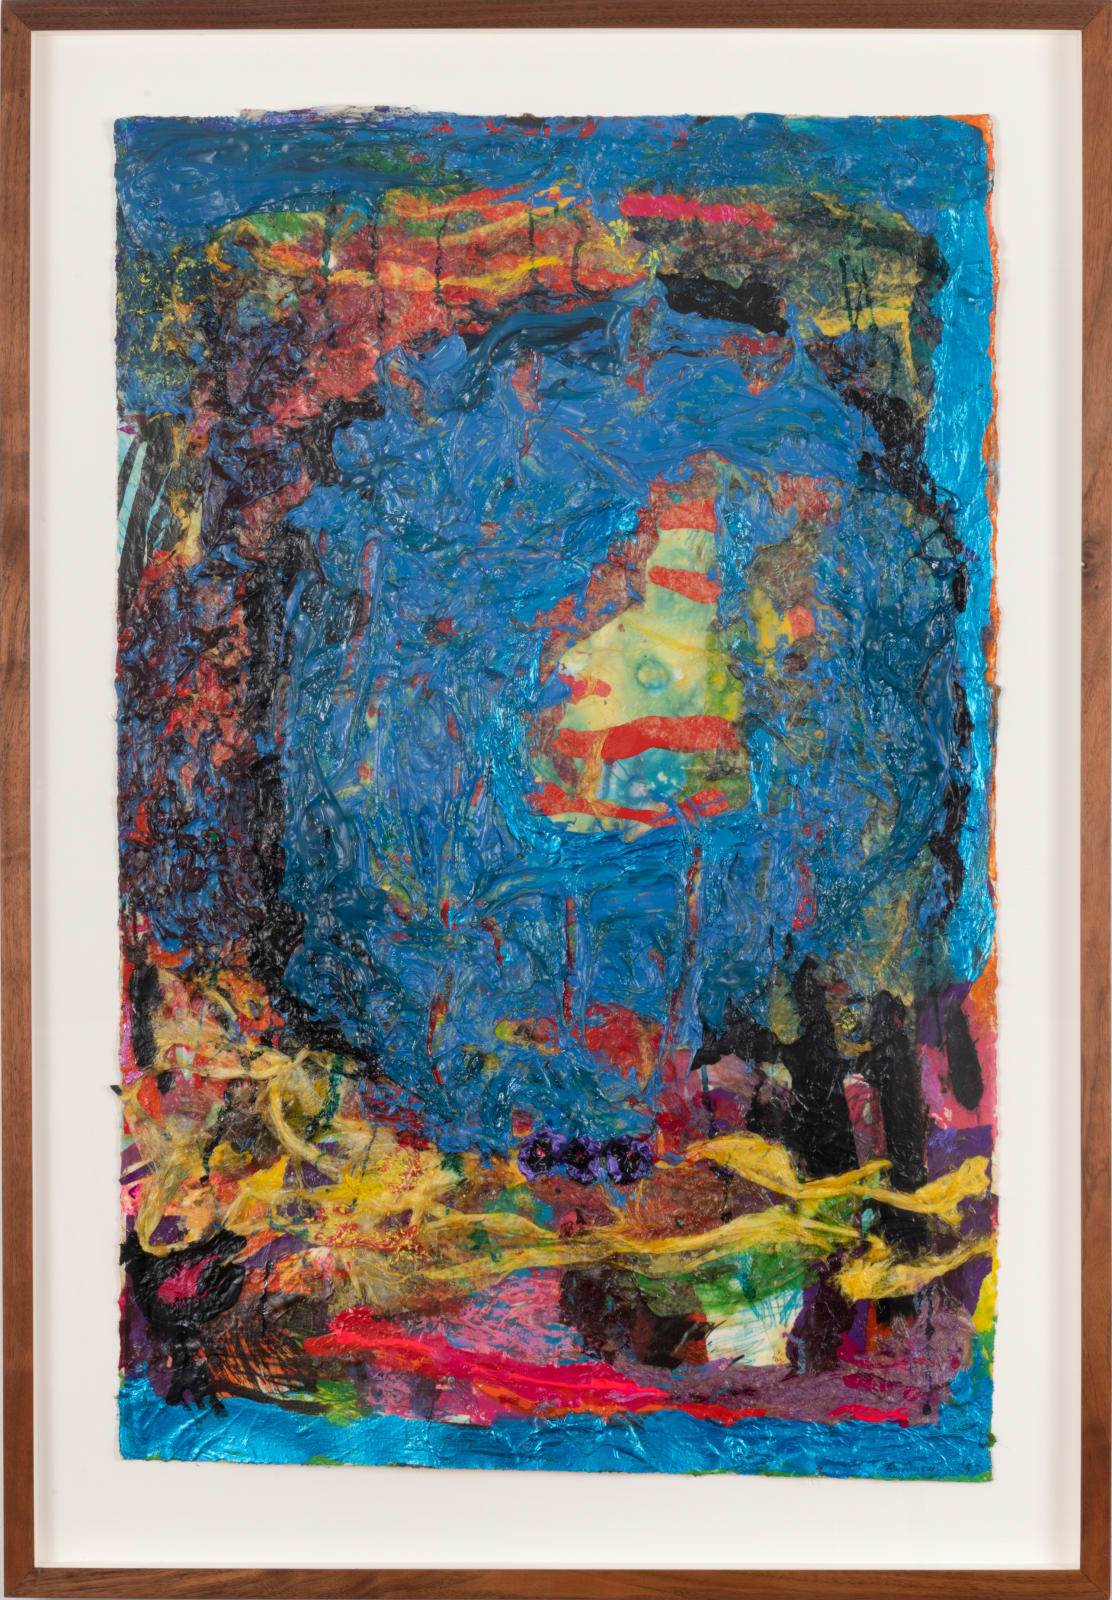 Sylvia Snowden, Malik, Farewell XXIX, 1995-1998, 85 × 54.6 cm / 33 1/2 × 21 1/2 in, Serigraph, paper, silver paper, oil pastel, and acrylic on paper